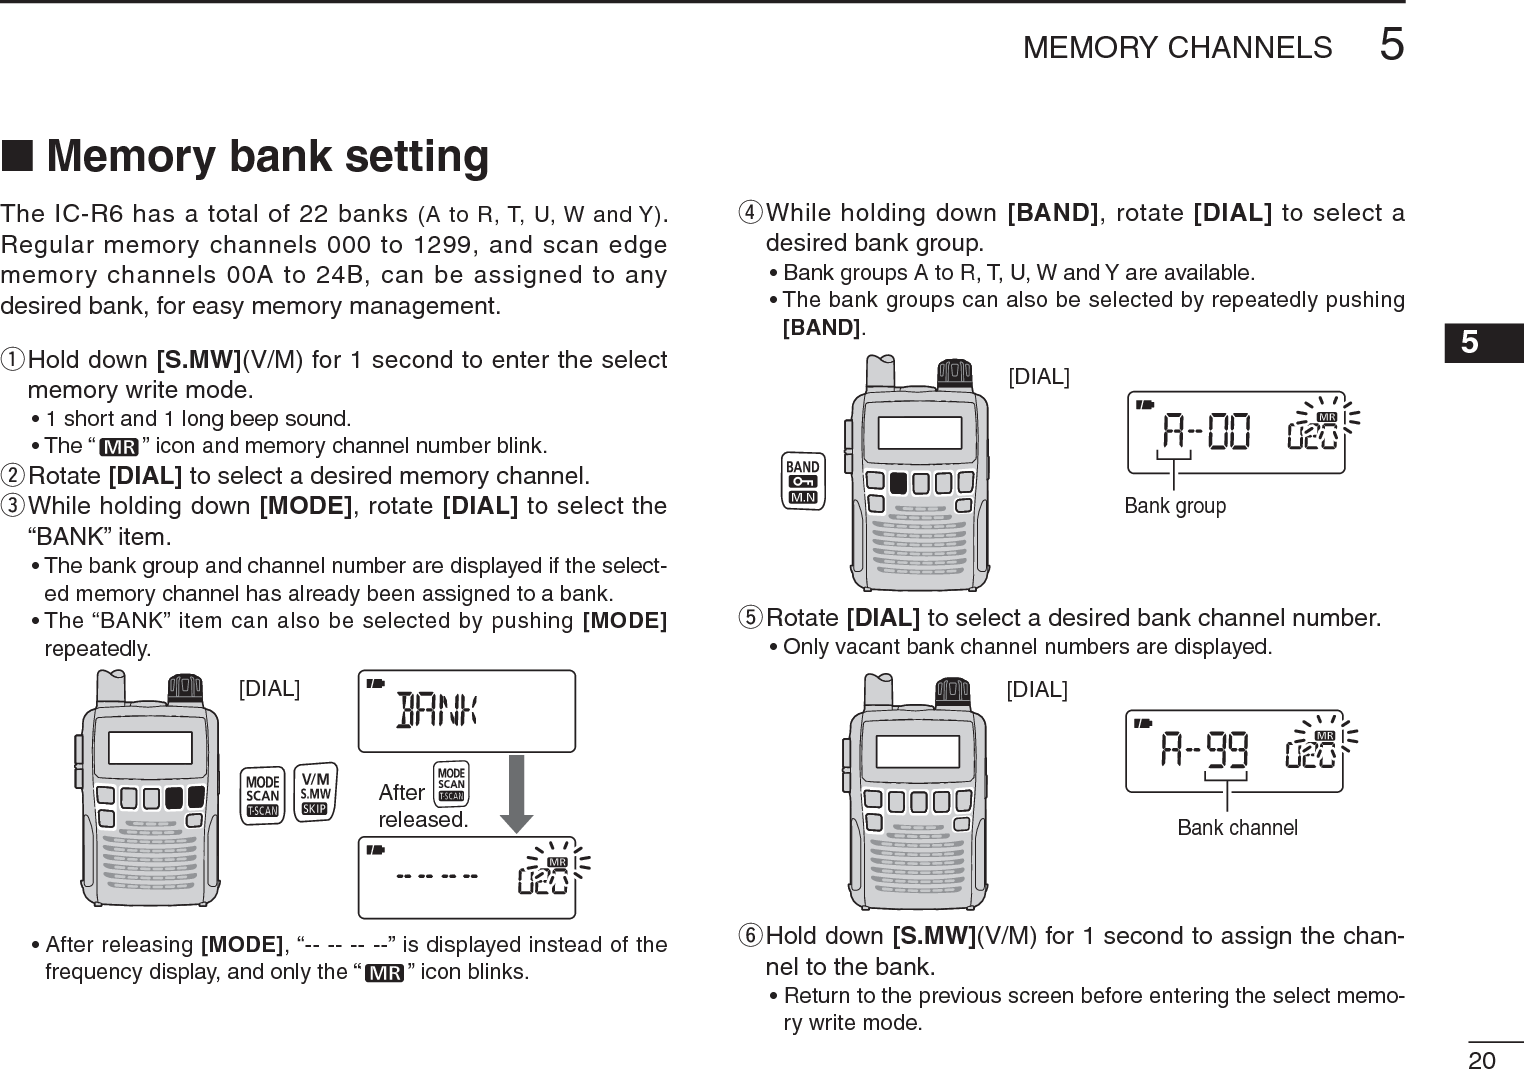 205MEMORY CHANNELS12345678910111213141516N Memory bank settingThe IC-R6 has a total of 22 banks (A to R, T, U, W and Y). Regular memory channels 000 to 1299, and scan edge memory channels 00A to 24B, can be assigned to any desired bank, for easy memory management.q  Hold down [S.MW](V/M) for 1 second to enter the select memory write mode.• 1 short and 1 long beep sound.• The “ ” icon and memory channel number blink.wRotate [DIAL] to select a desired memory channel.e  While holding down [MODE], rotate [DIAL] to select the “BANK” item.• The bank group and channel number are displayed if the select-ed memory channel has already been assigned to a bank.• The “BANK” item can also be selected by pushing [MODE]repeatedly.[DIAL]Afterreleased.• After releasing [MODE], “-- -- -- --” is displayed instead of the frequency display, and only the “ ” icon blinks.r  While holding down [BAND], rotate [DIAL] to select a desired bank group.• Bank groups A to R, T, U, W and Y are available.• The bank groups can also be selected by repeatedly pushing [BAND].[DIAL]Bank grouptRotate [DIAL] to select a desired bank channel number.• Only vacant bank channel numbers are displayed.[DIAL]Bank channely  Hold down [S.MW](V/M) for 1 second to assign the chan-nel to the bank.• Return to the previous screen before entering the select memo-ry write mode.